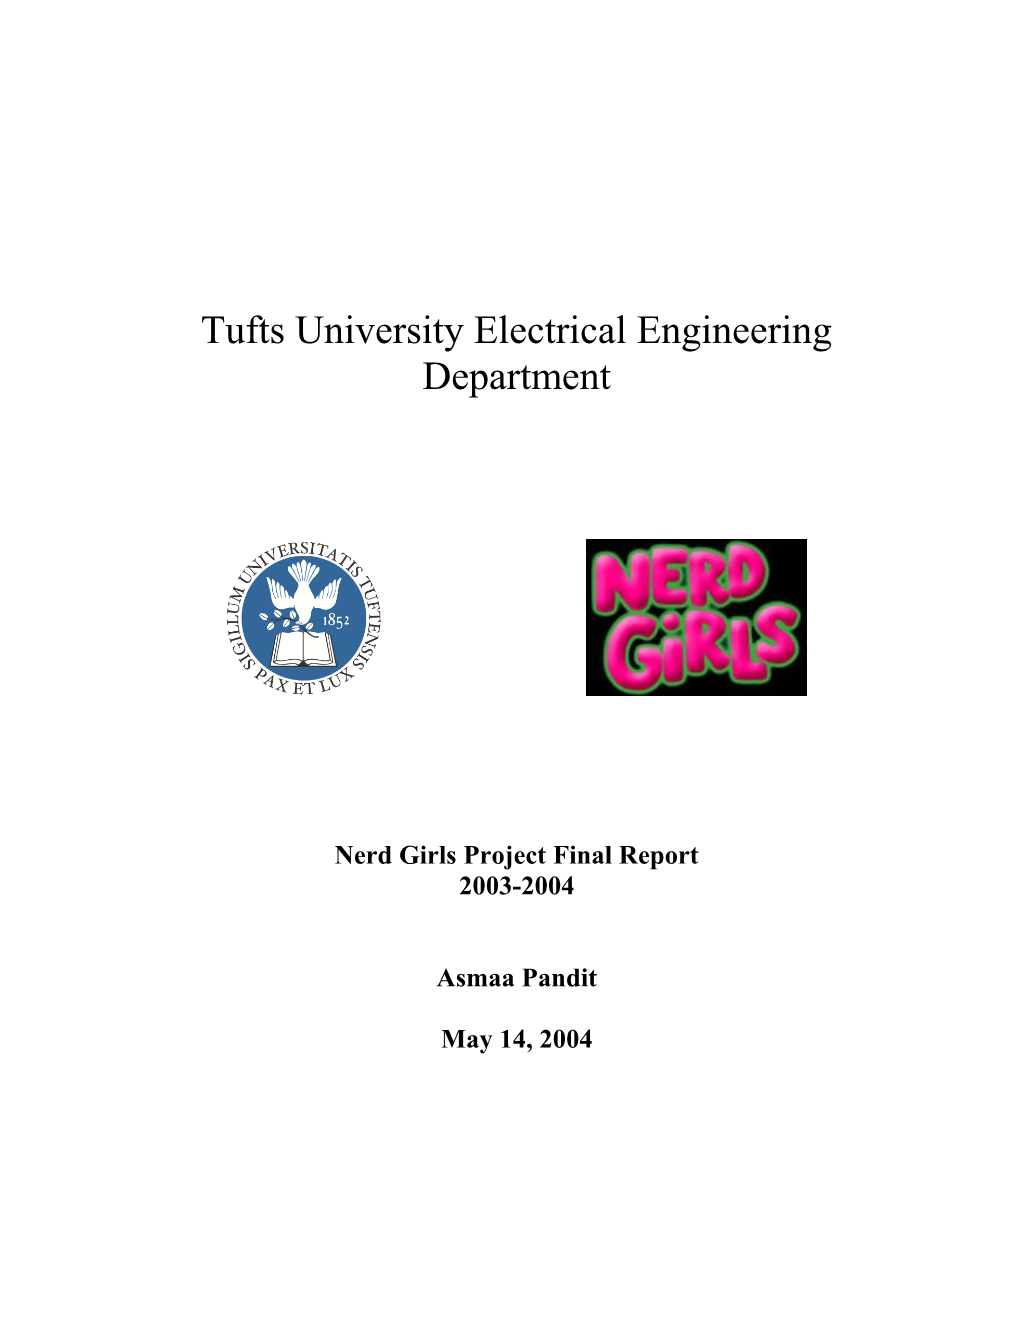 Tufts University Electrical Engineering Department